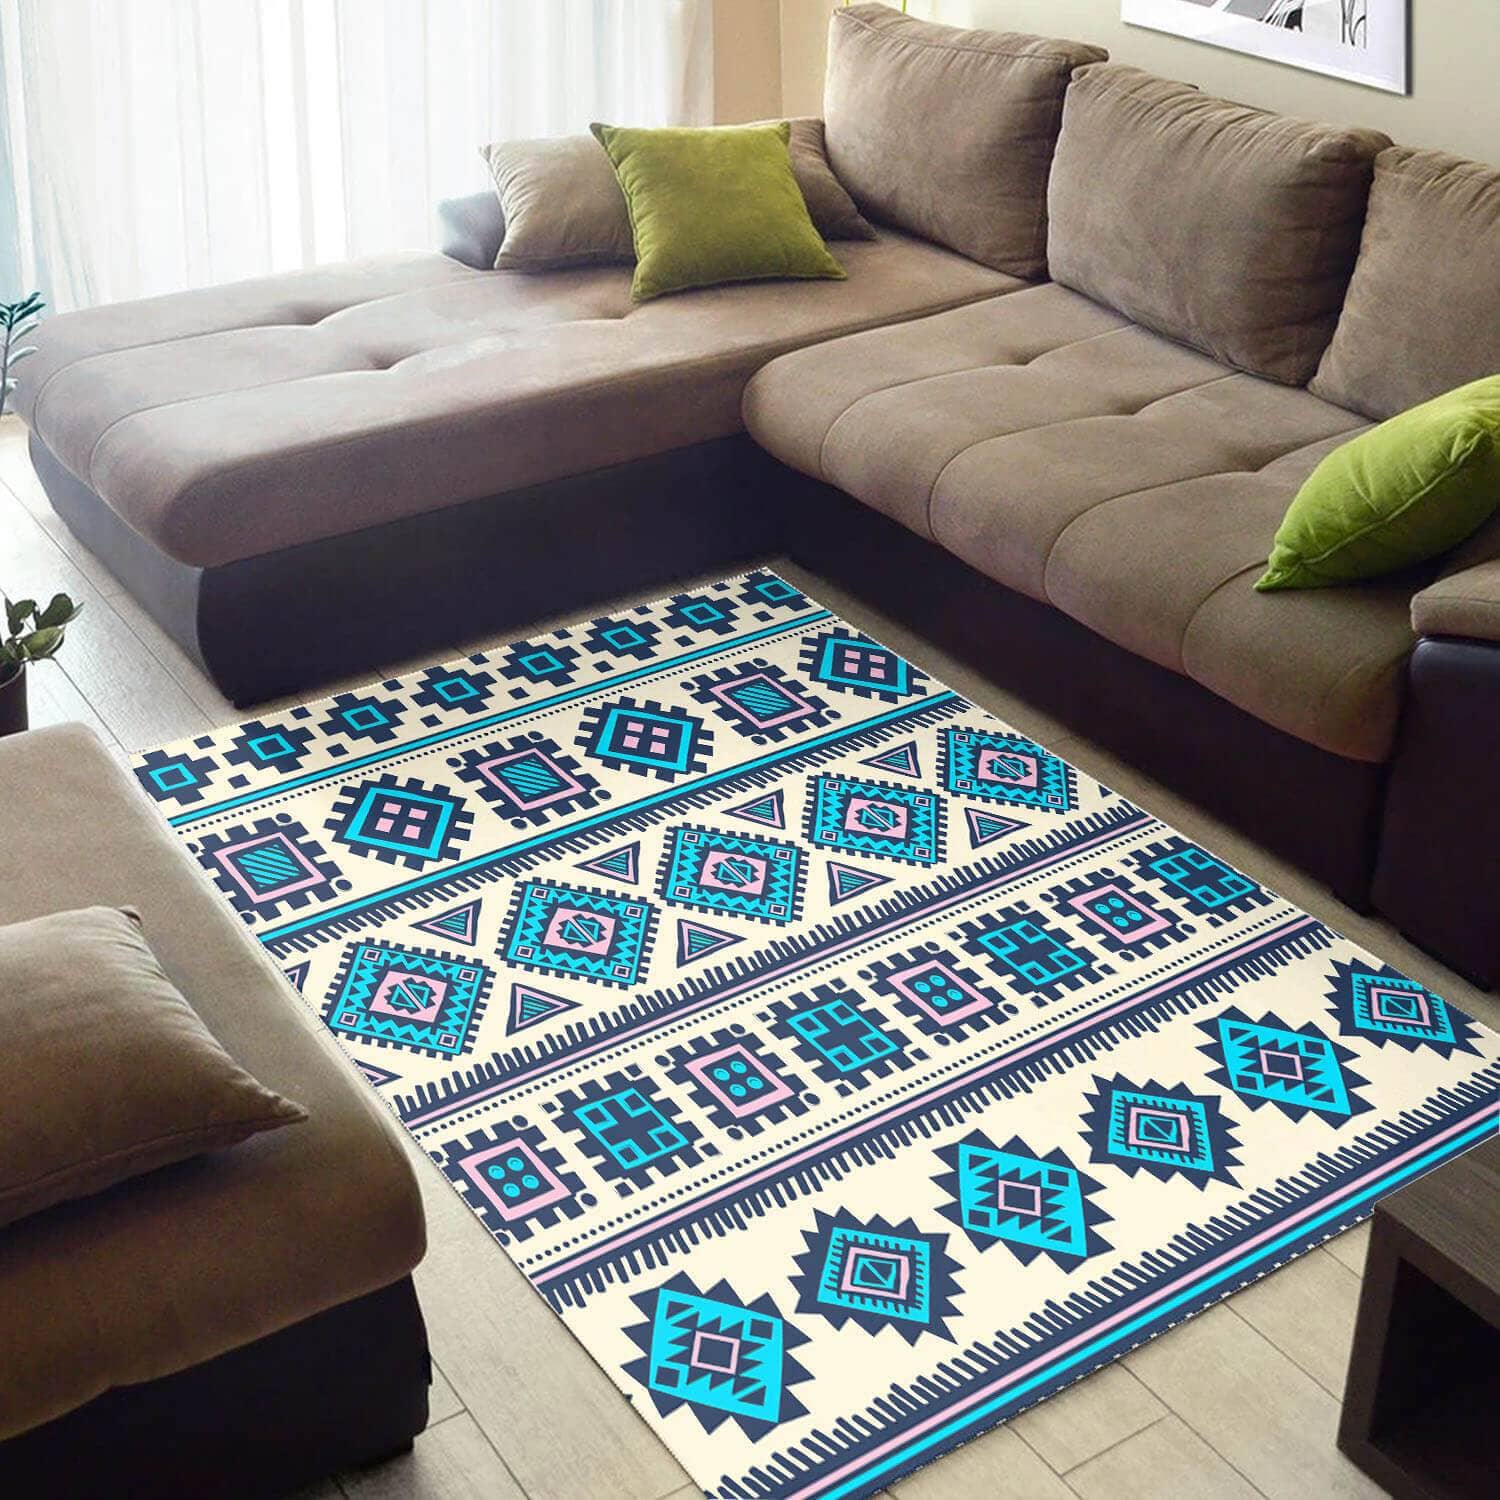 Inspired African Perfect Style Afrocentric Art Design Floor Living Room Rug